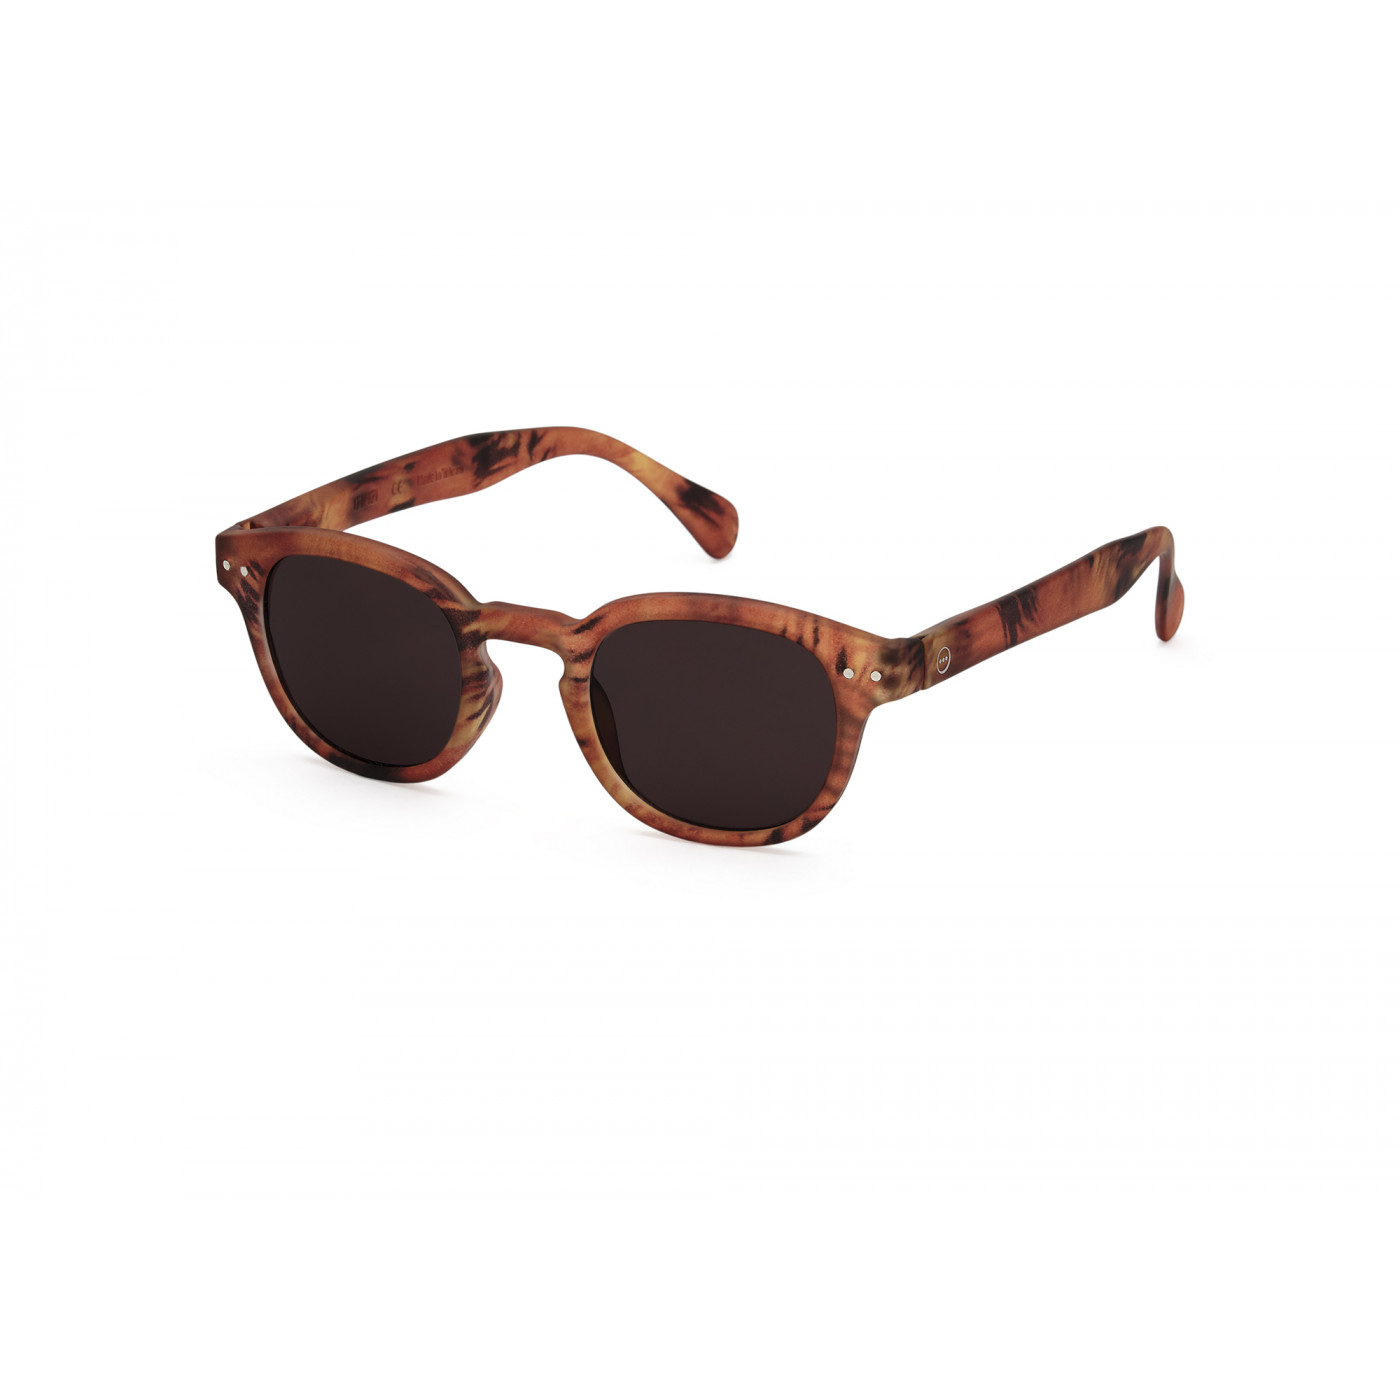 Sunglasses frame C Wild Bright by Izipizi Essentia collection for AW22